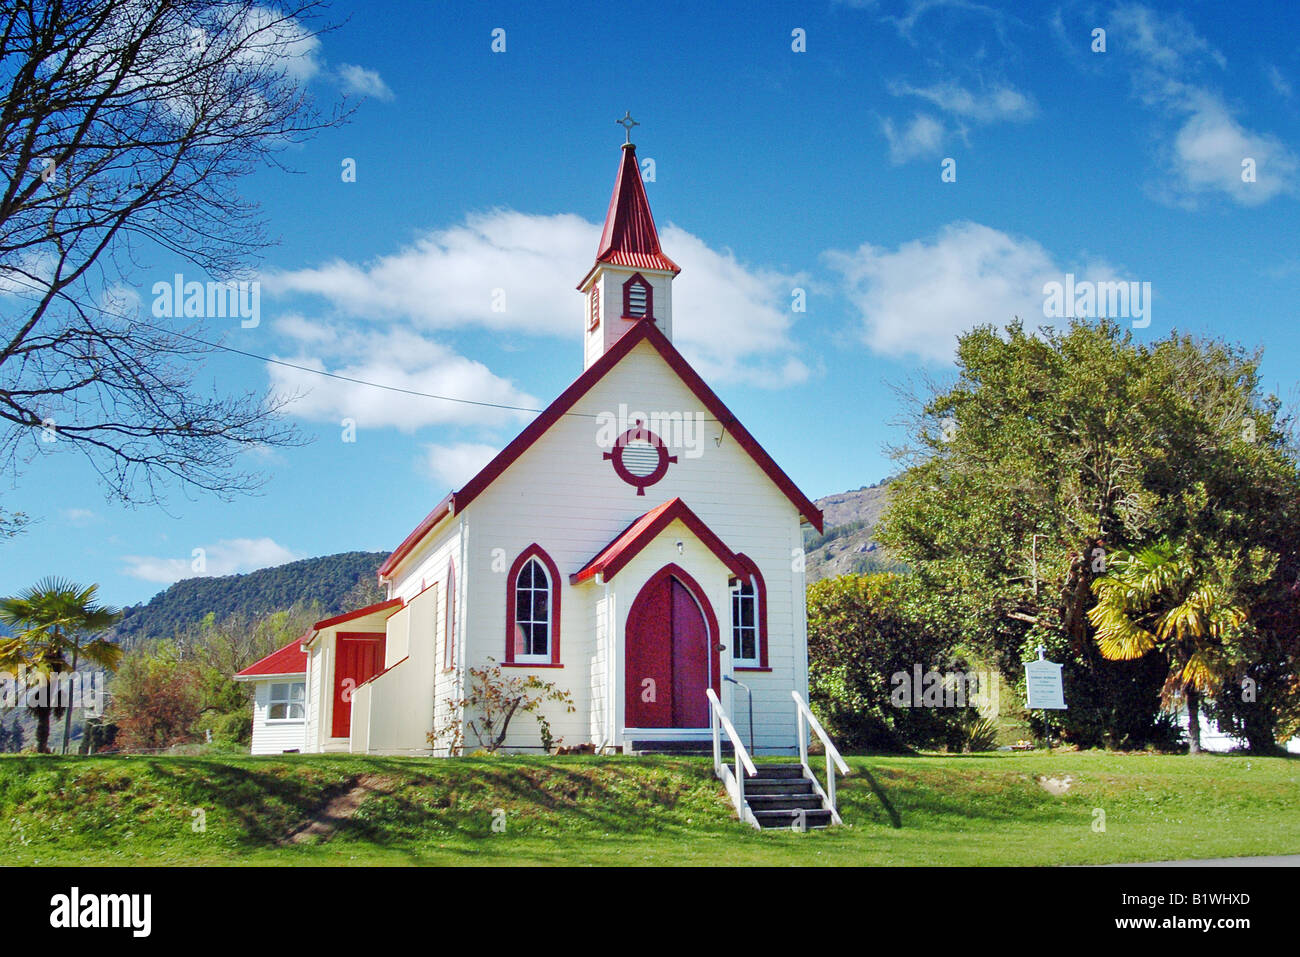 NEW ZEALAND NORTH ISLAND SHANNON Banque D'Images